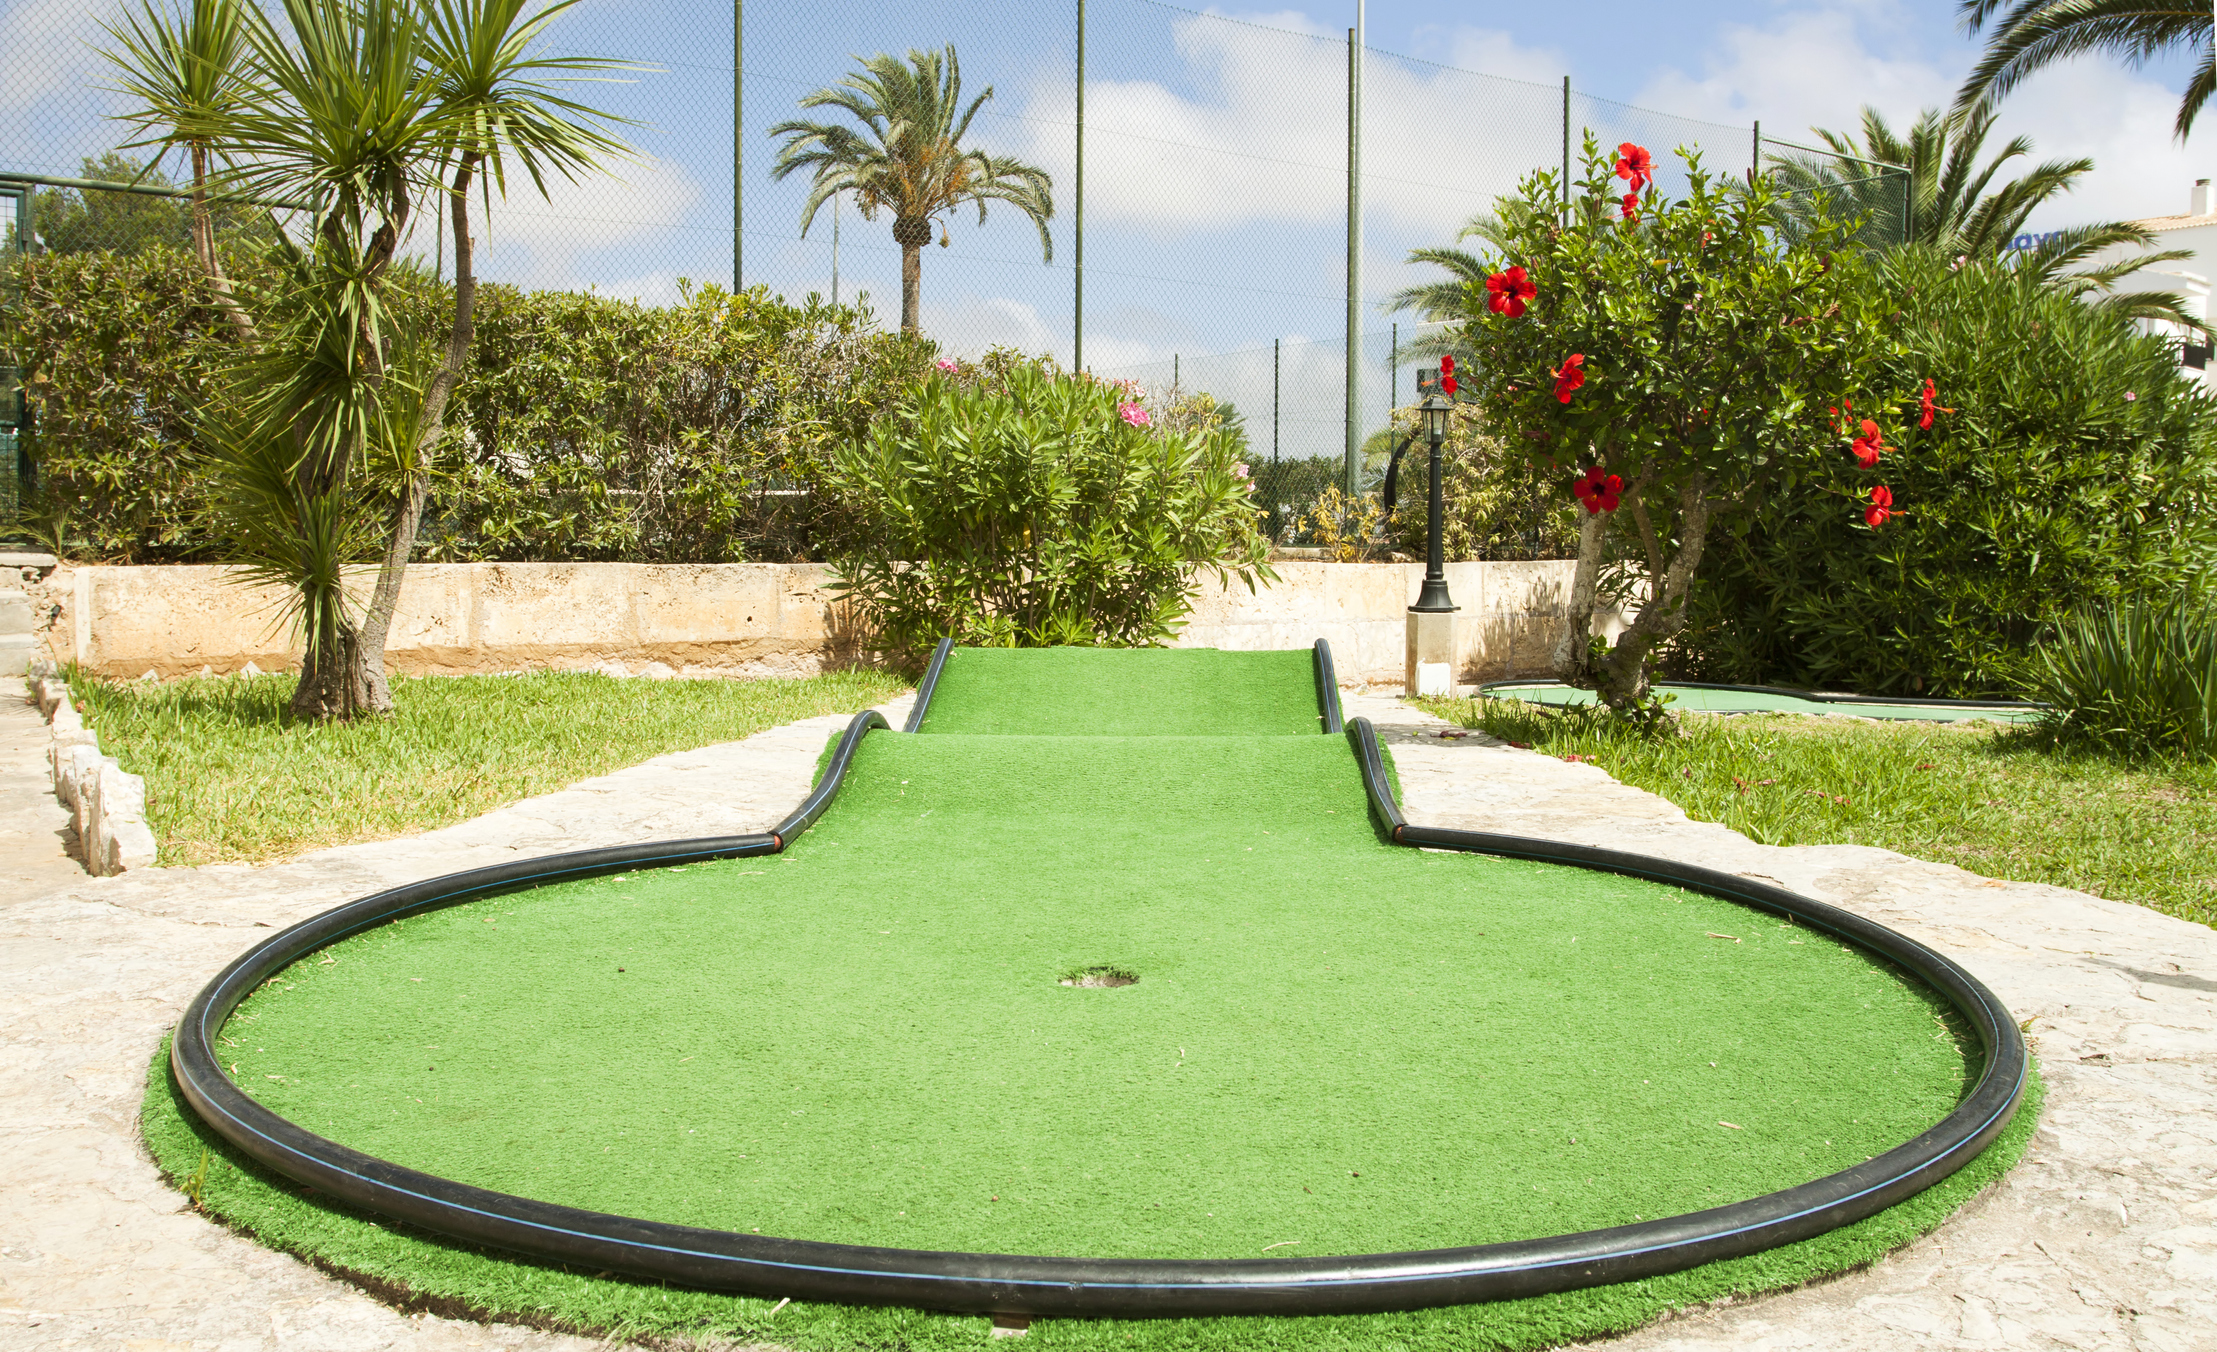 A mini golf construction in an open area.